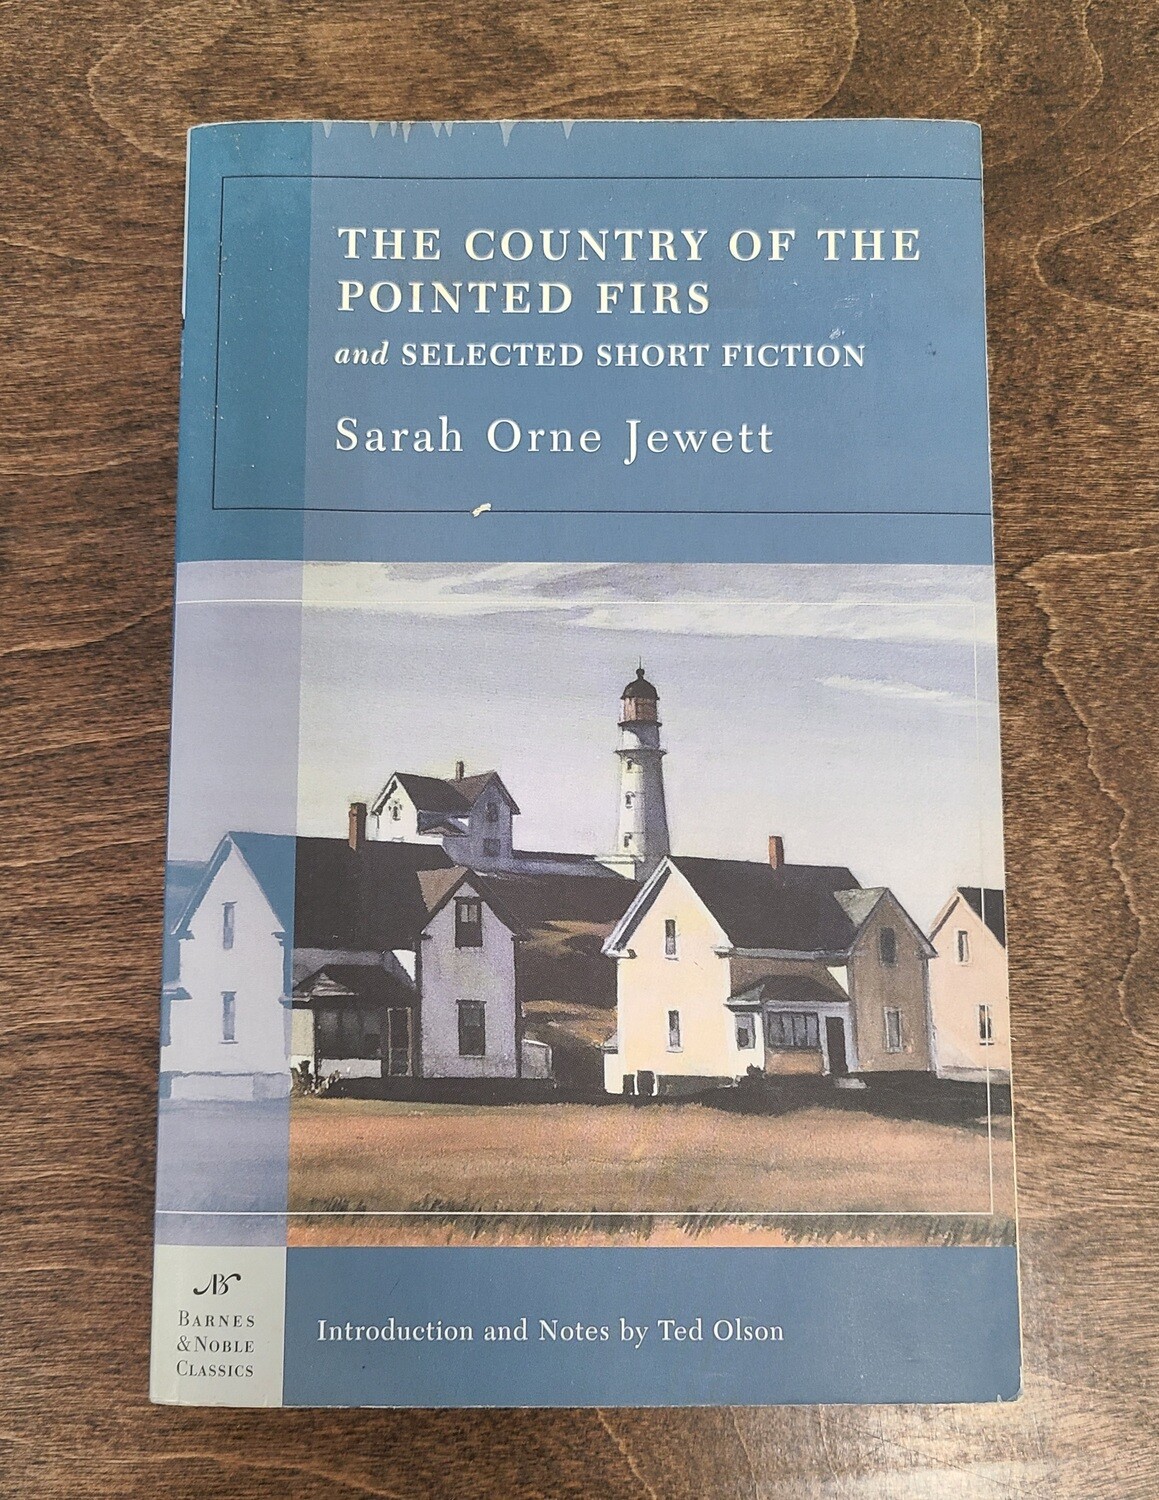 The Country of the Pointed Firs and Selected Short Fiction by Sarah Orne Jewett